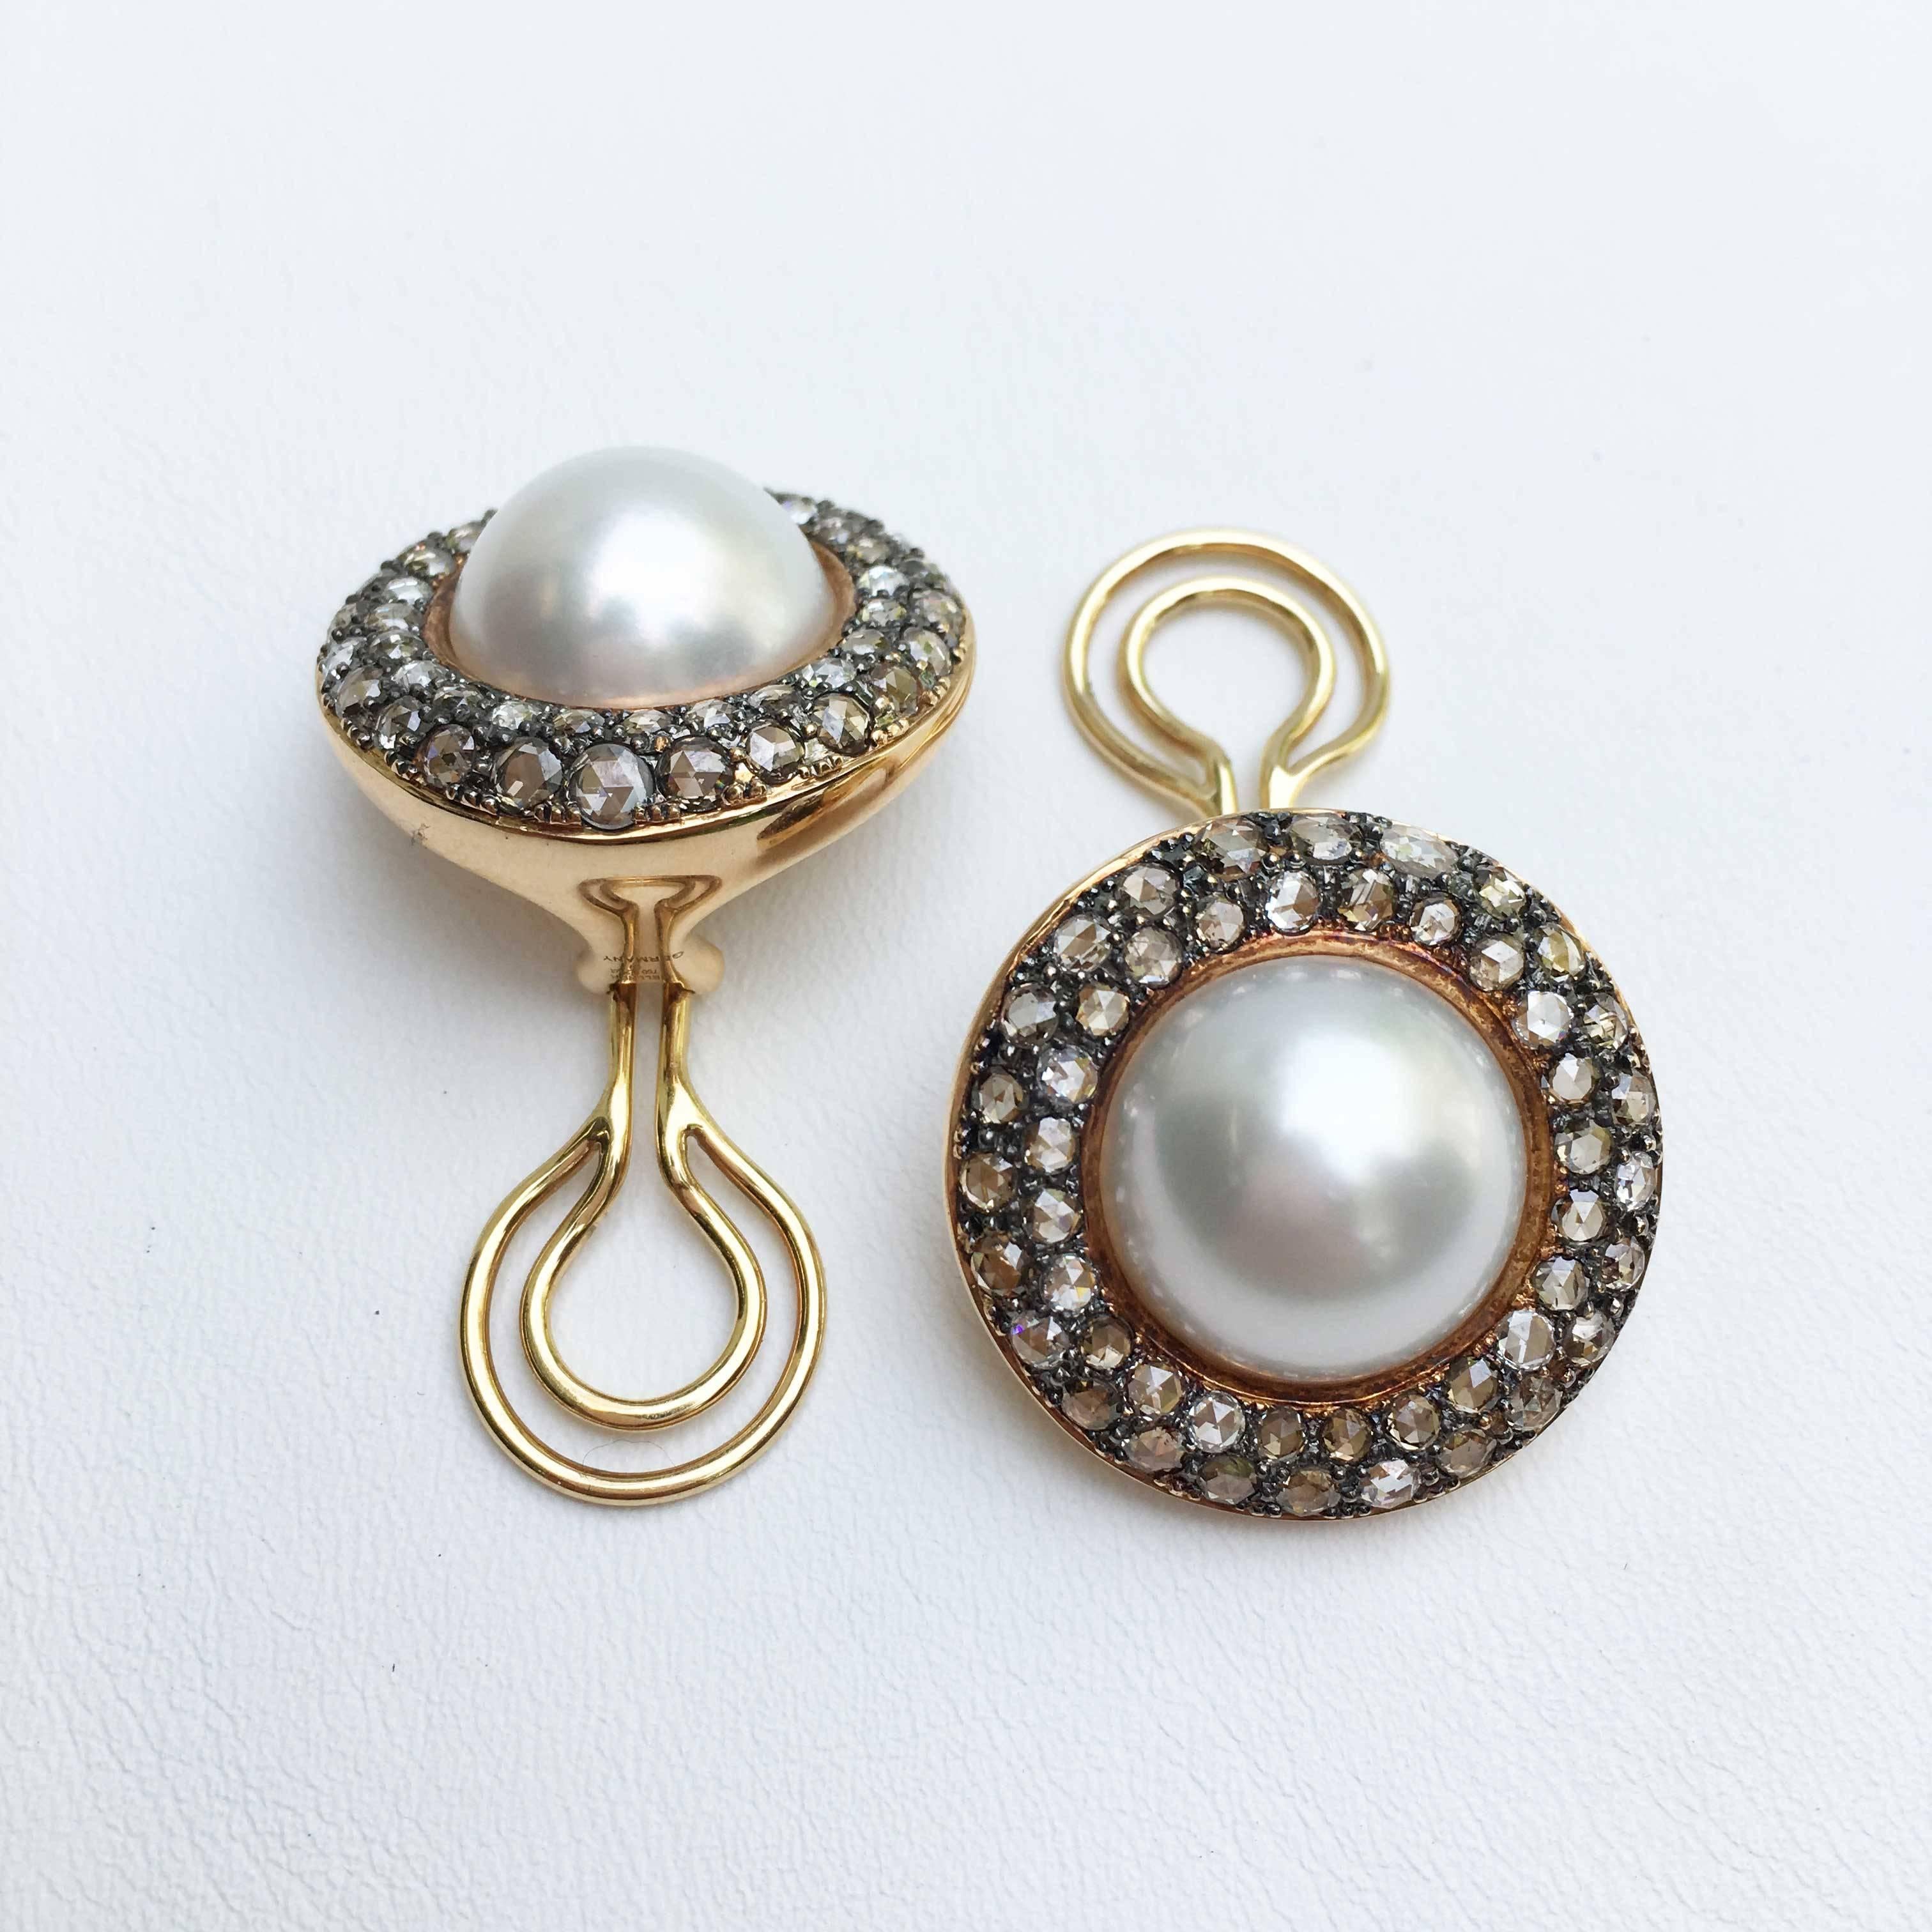 Very fine, top Quality South Sea half cultured pearls in white color, 14-15 mm in diameter set in rosegold 18 Karat.
Framed with natural brown diamonds in rosecuts with a total weight of 4,46 ct.
Beautiful and big look with unique earrings in